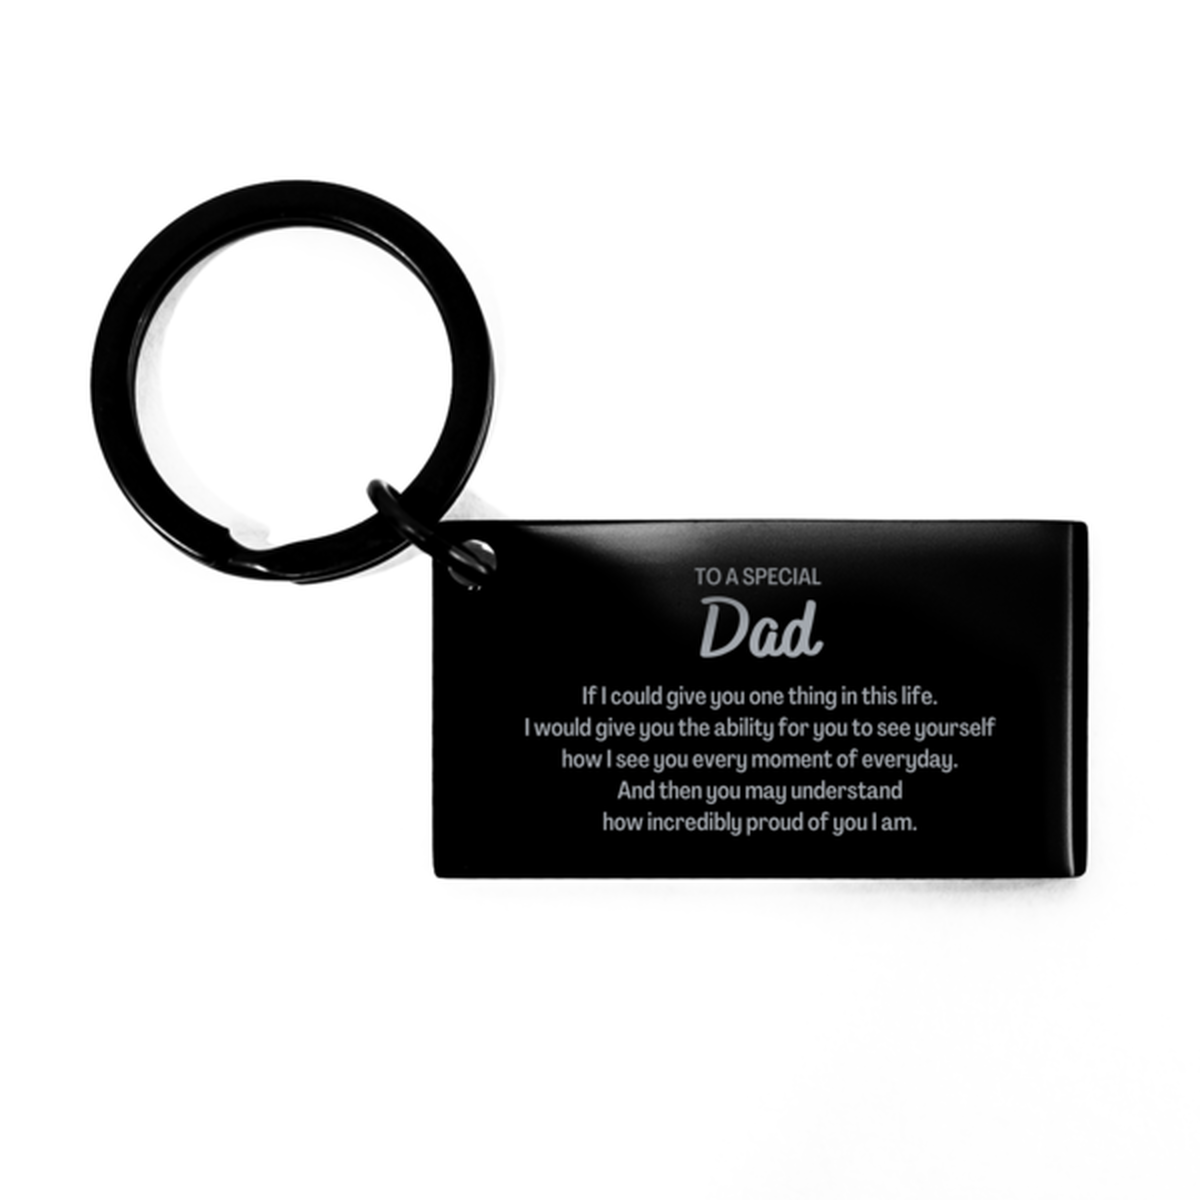 To My Dad Keychain, Gifts For Dad Engraved, Inspirational Gifts for Christmas Birthday, Epic Gifts for Dad To A Special Dad how incredibly proud of you I am